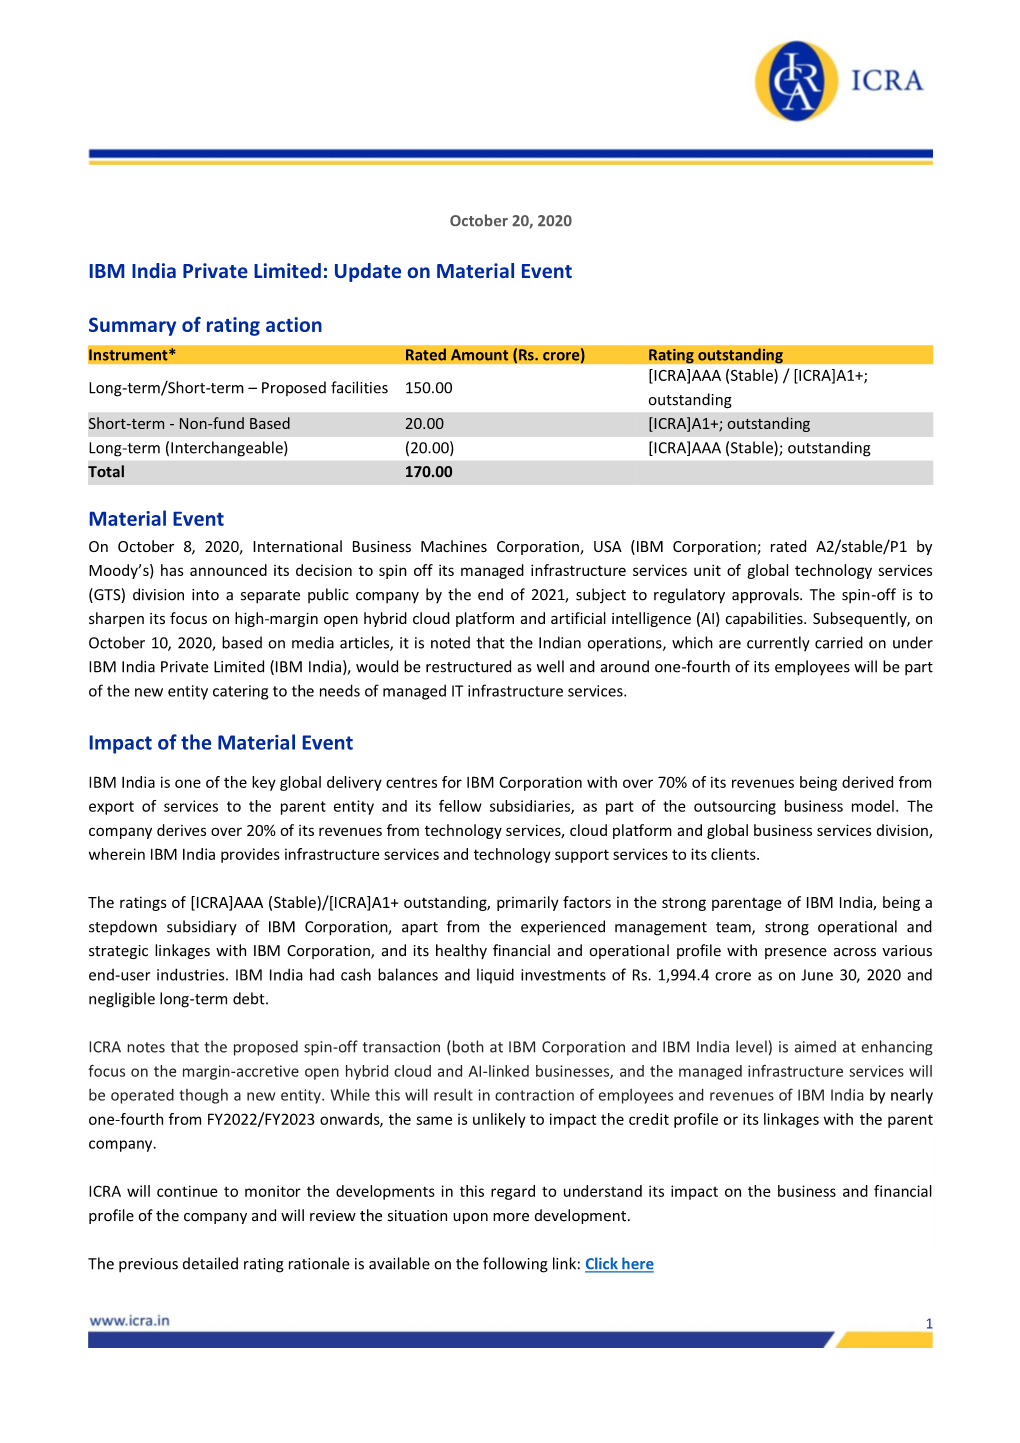 IBM India Private Limited: Update on Material Event